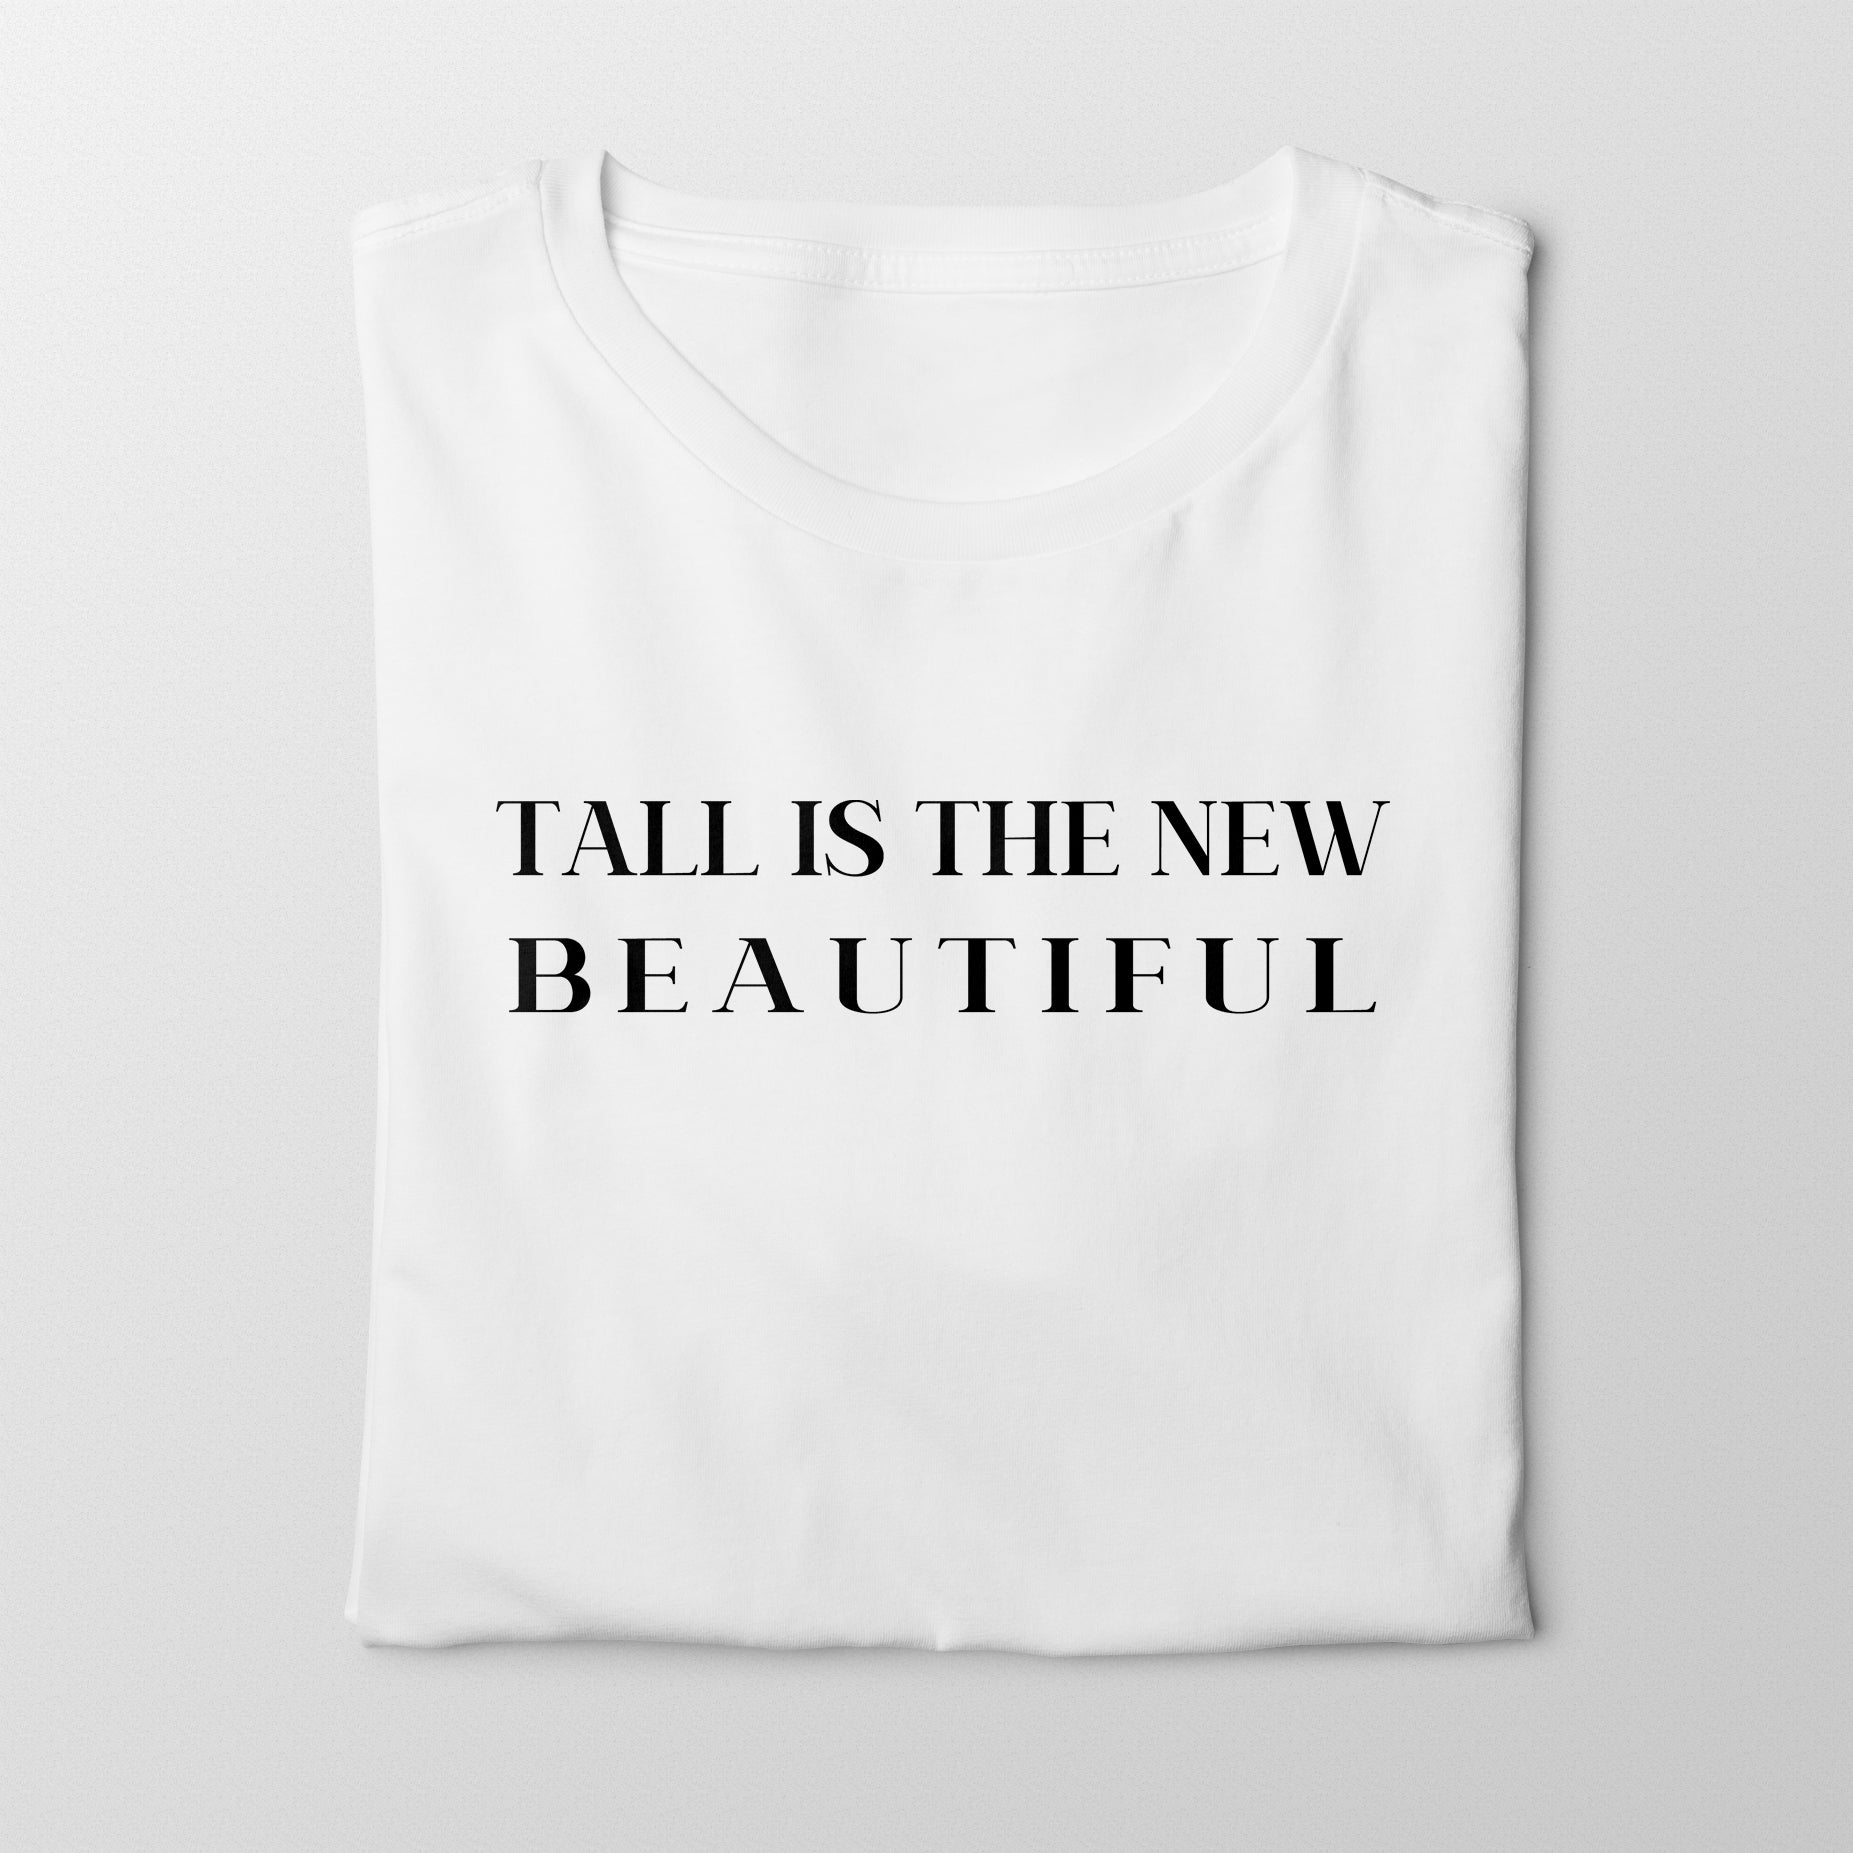 Tall Is The New Beautiful T-Shirt